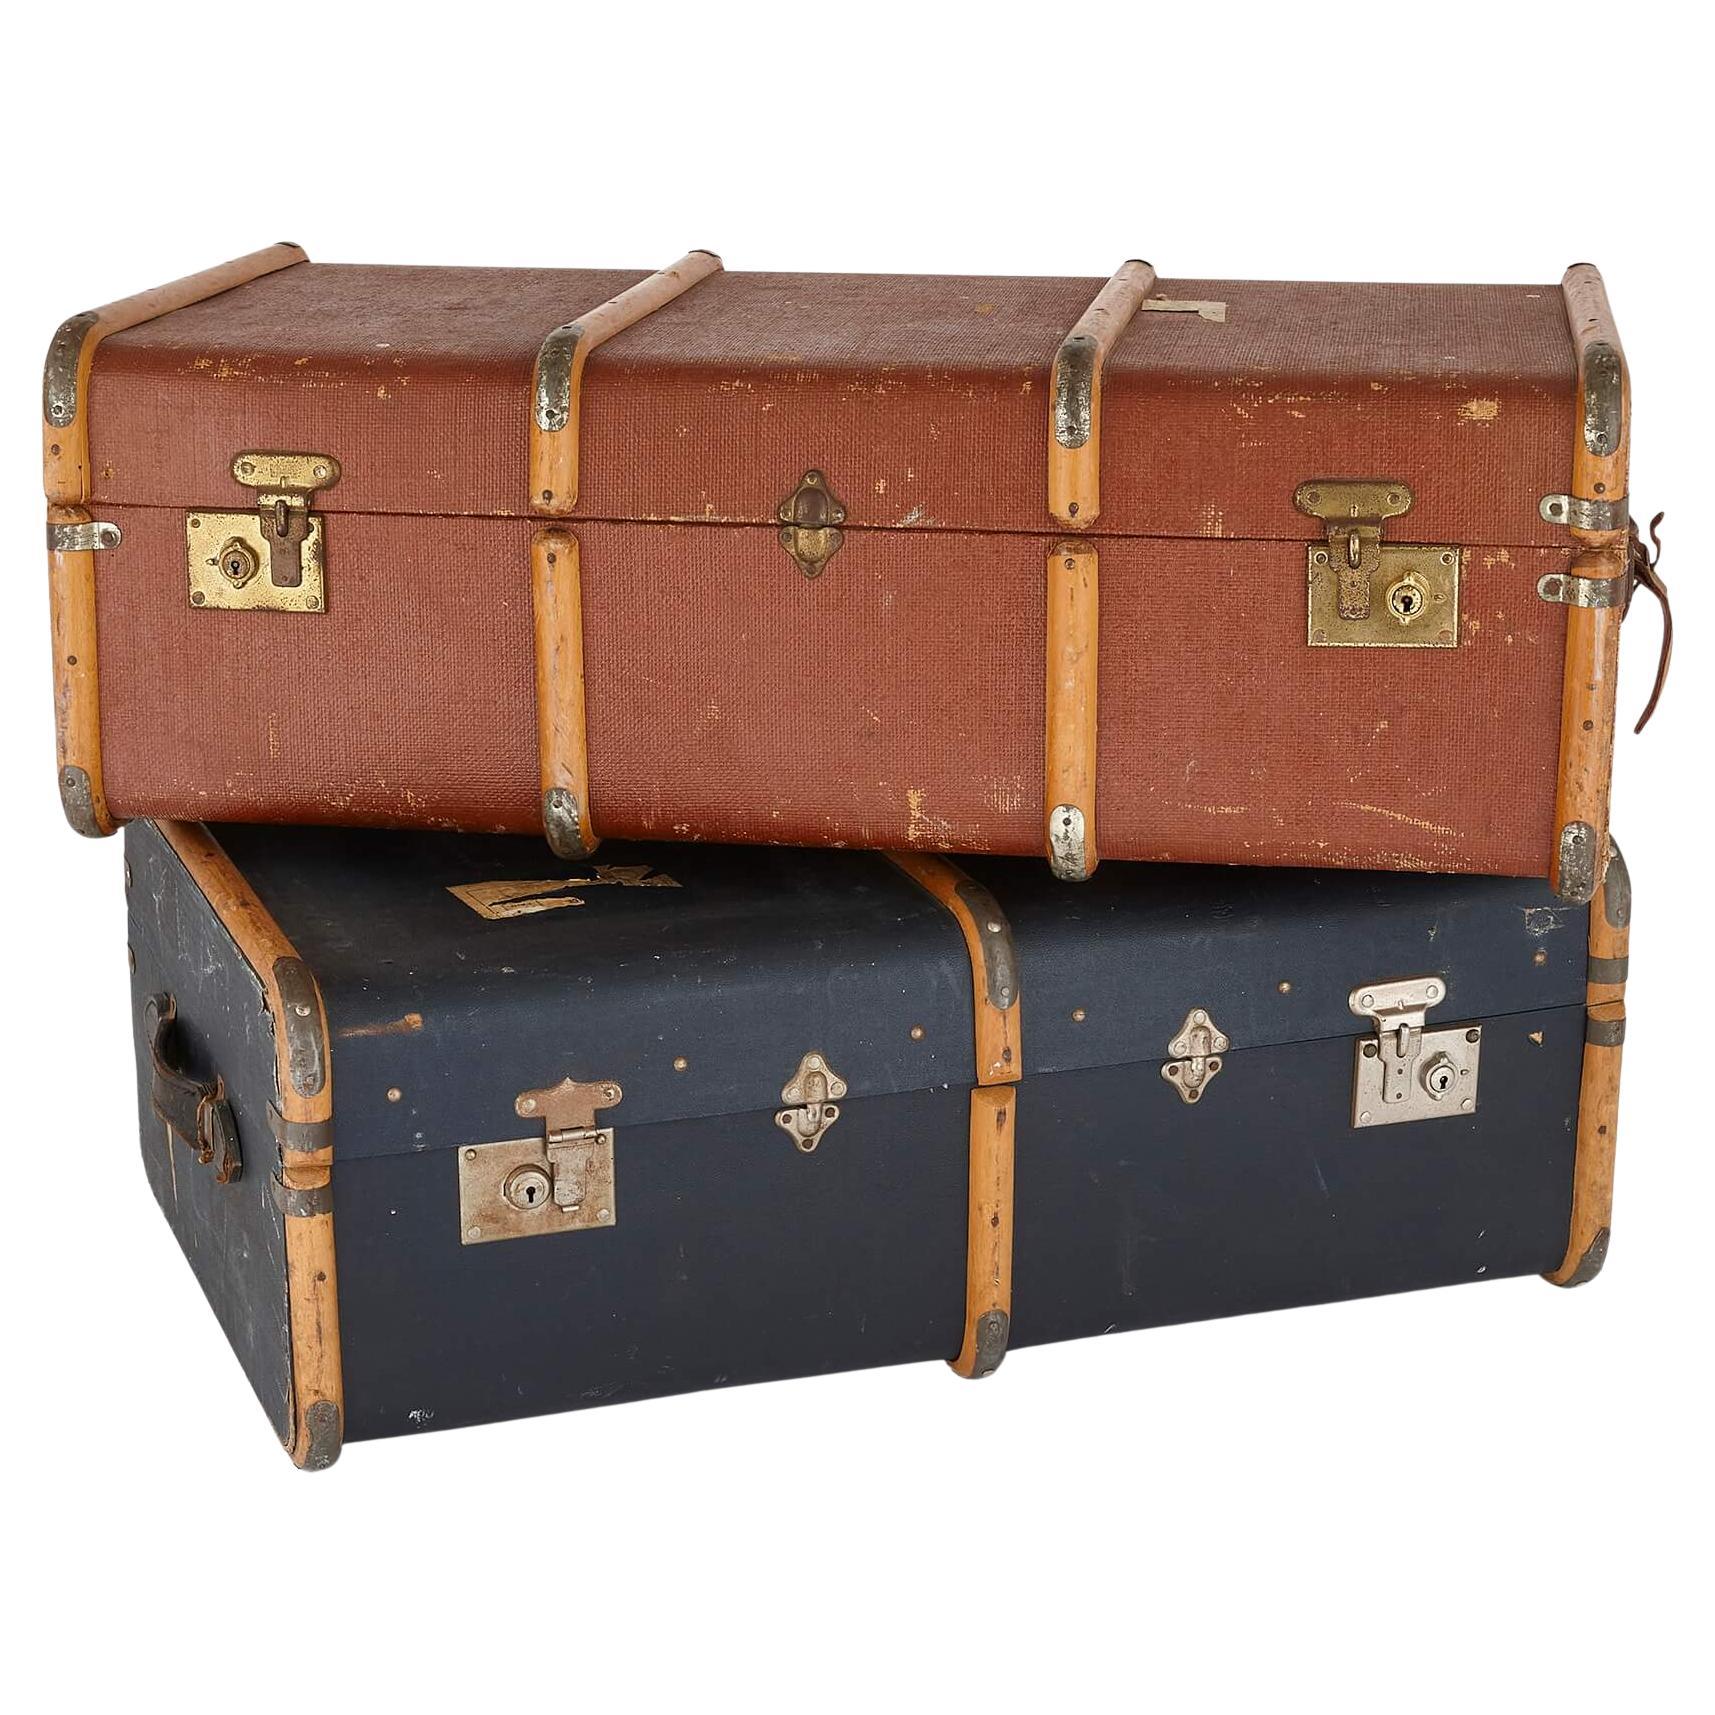 Pair of Large Vintage English Travel Cases Made by Frenchs For Sale